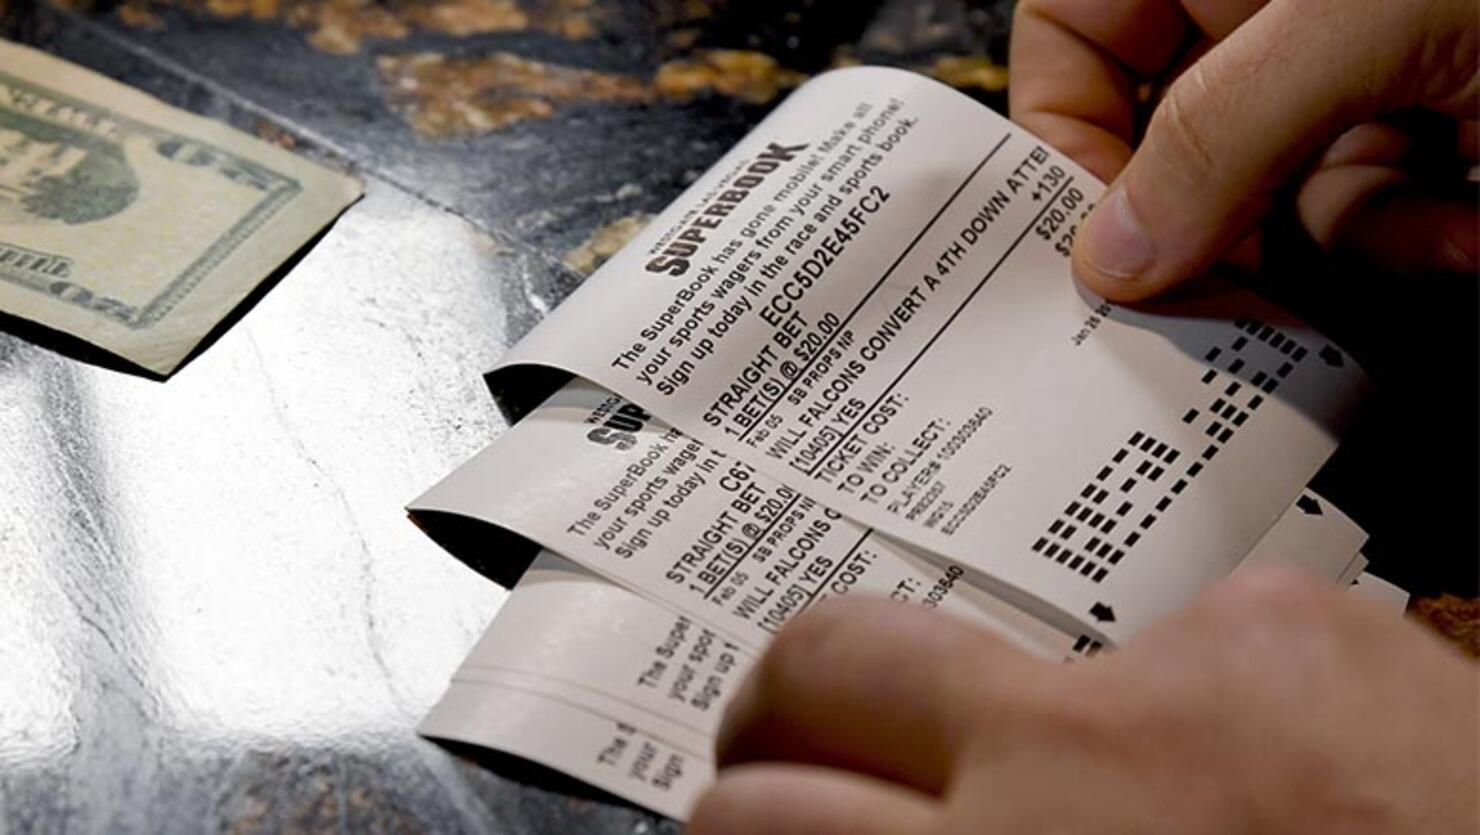 A bettor places wagers on some of the more than 400 proposition bets on the Super Bowl